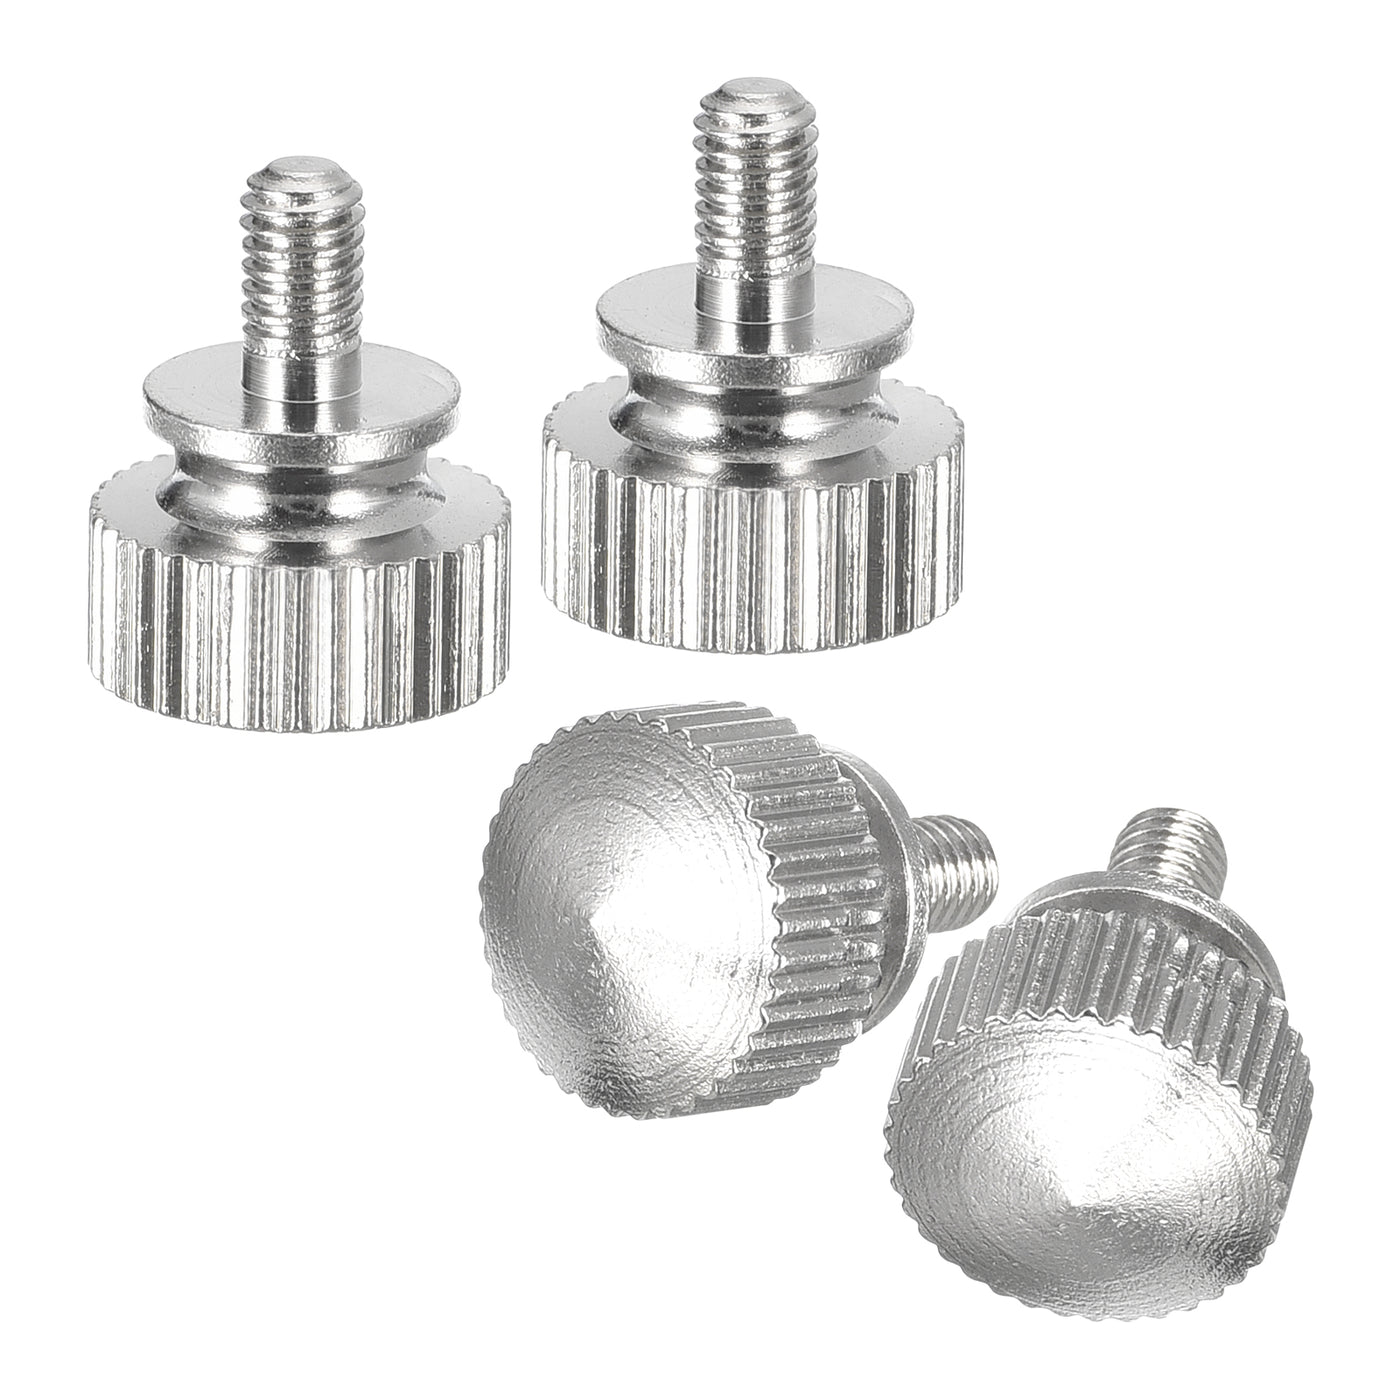 uxcell Uxcell M3x5mm Knurled Thumb Screws, 4pcs Brass Thumb Screws with Shoulder, Silver Tone